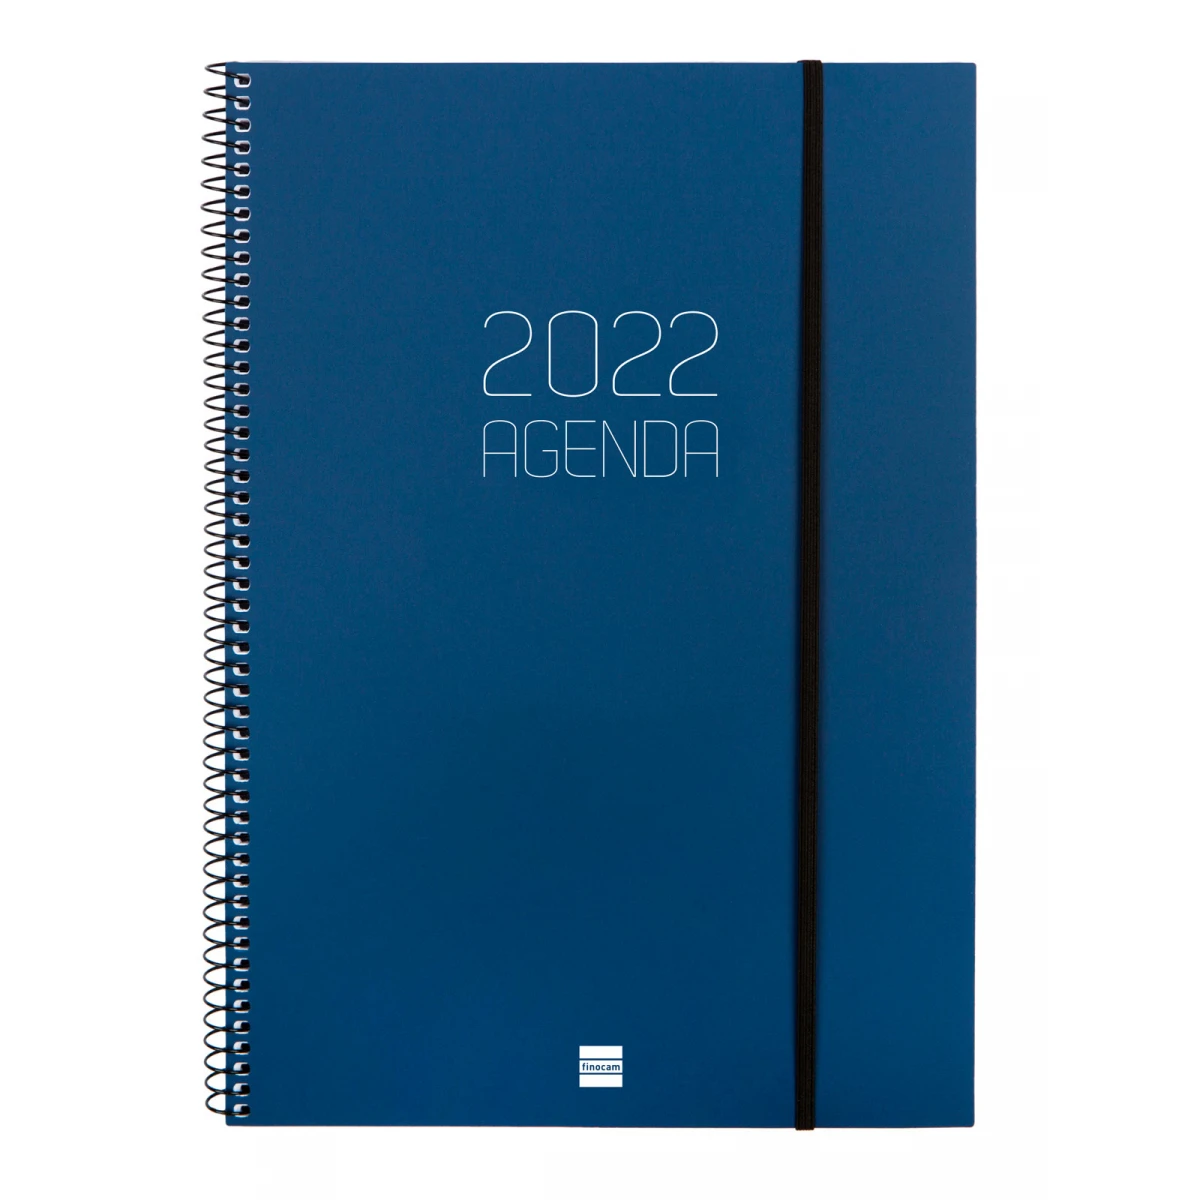 Spiral AGENDA 2022 day page blue size A4|Planners| - AliExpress